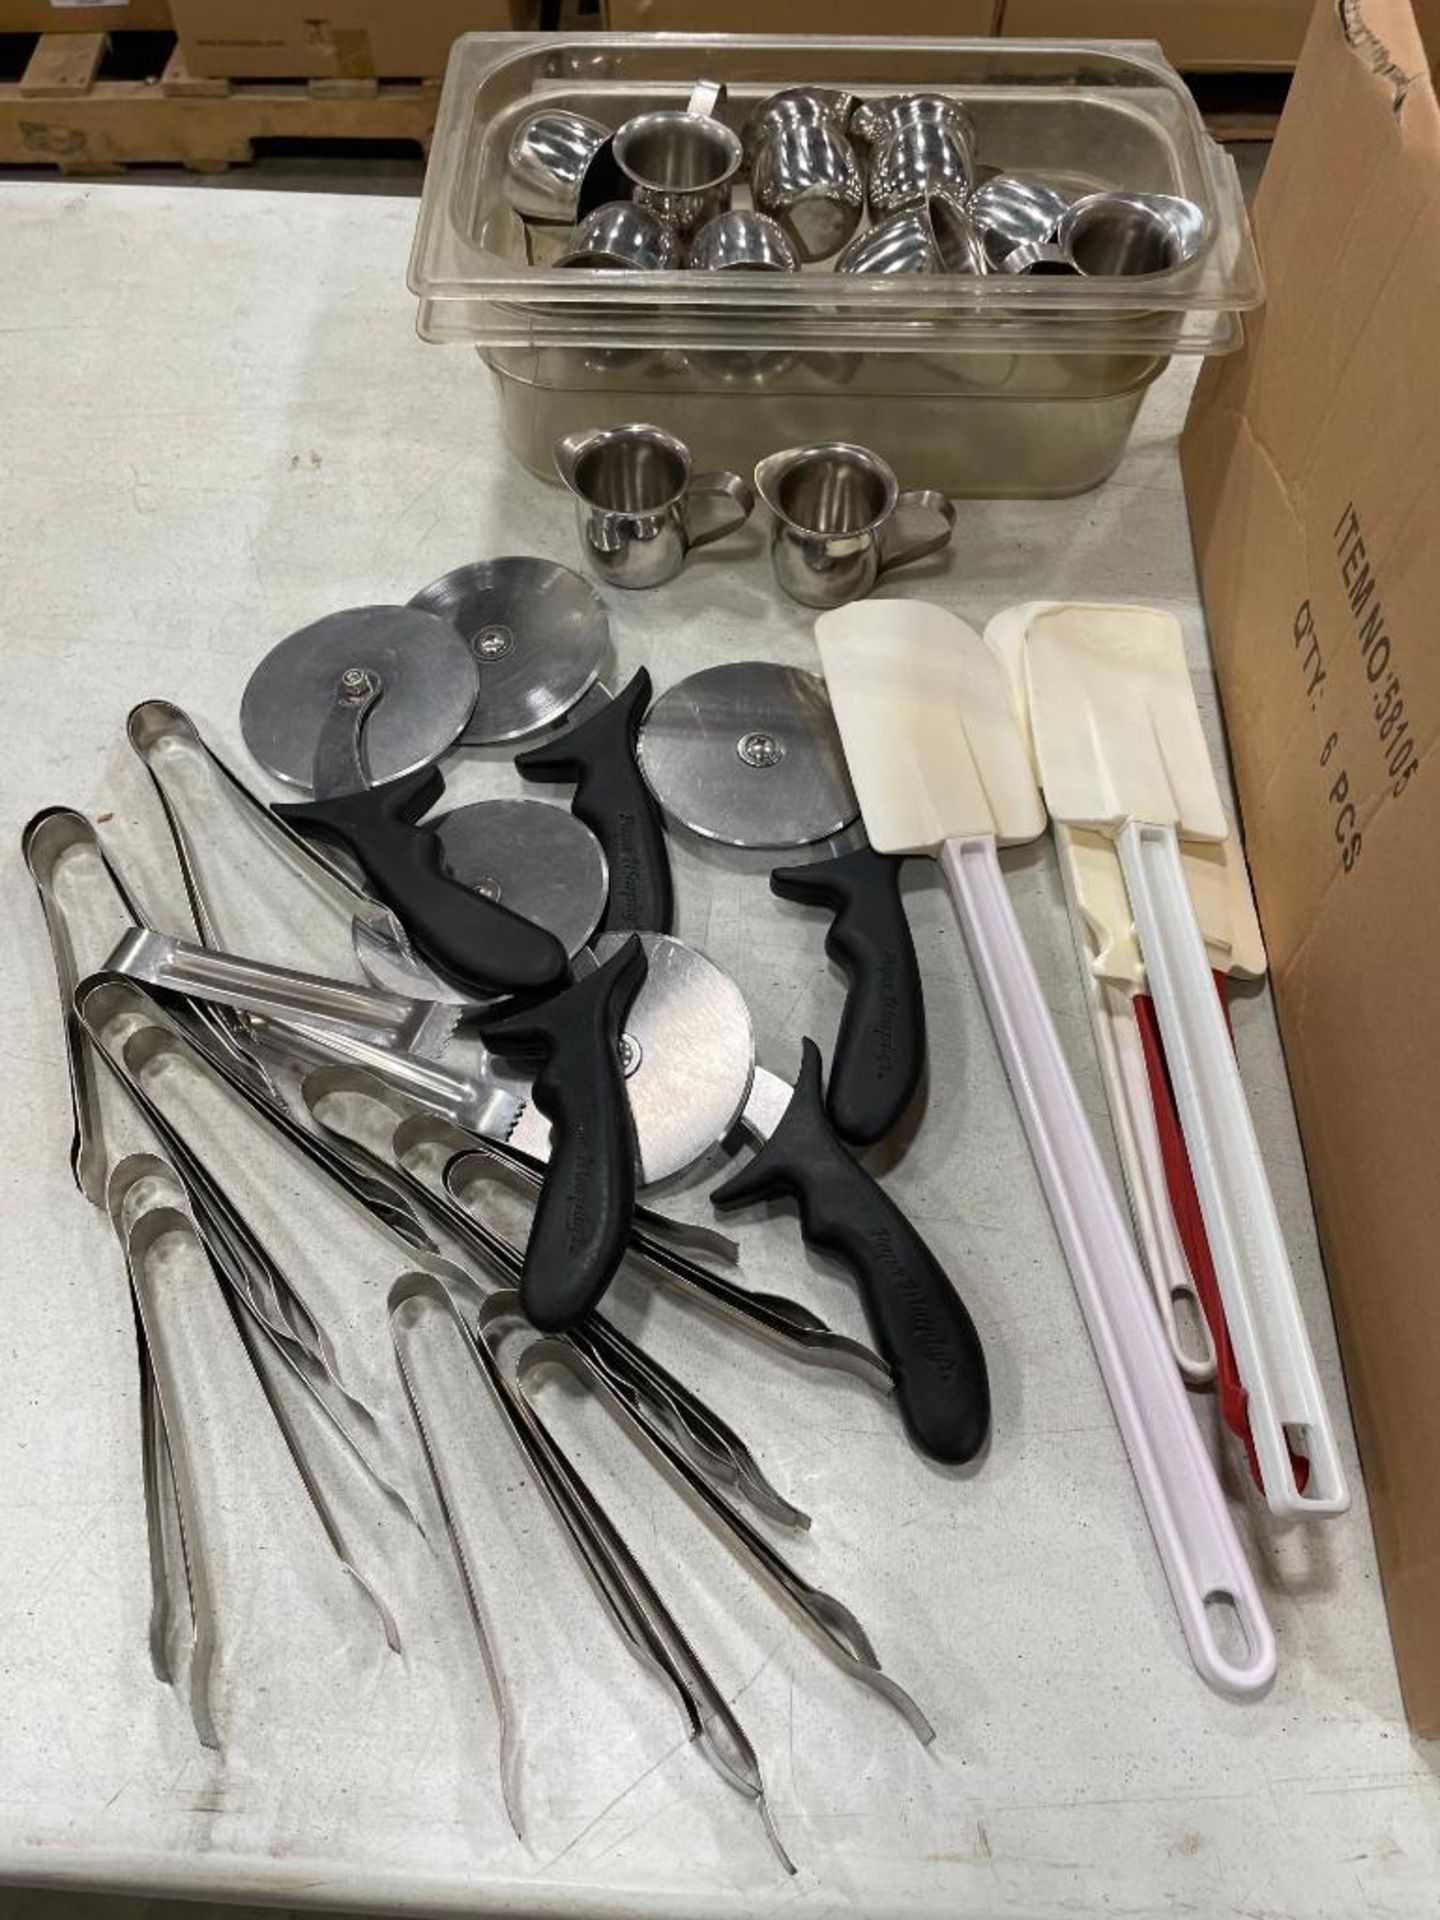 LOT OF ASSORTED KITCHEN ITEMS INCLUDING: NAPKIN DISPENSER, PIZZA CUTTERS, STAINLESS STEEL TONGS, ETC - Image 2 of 4